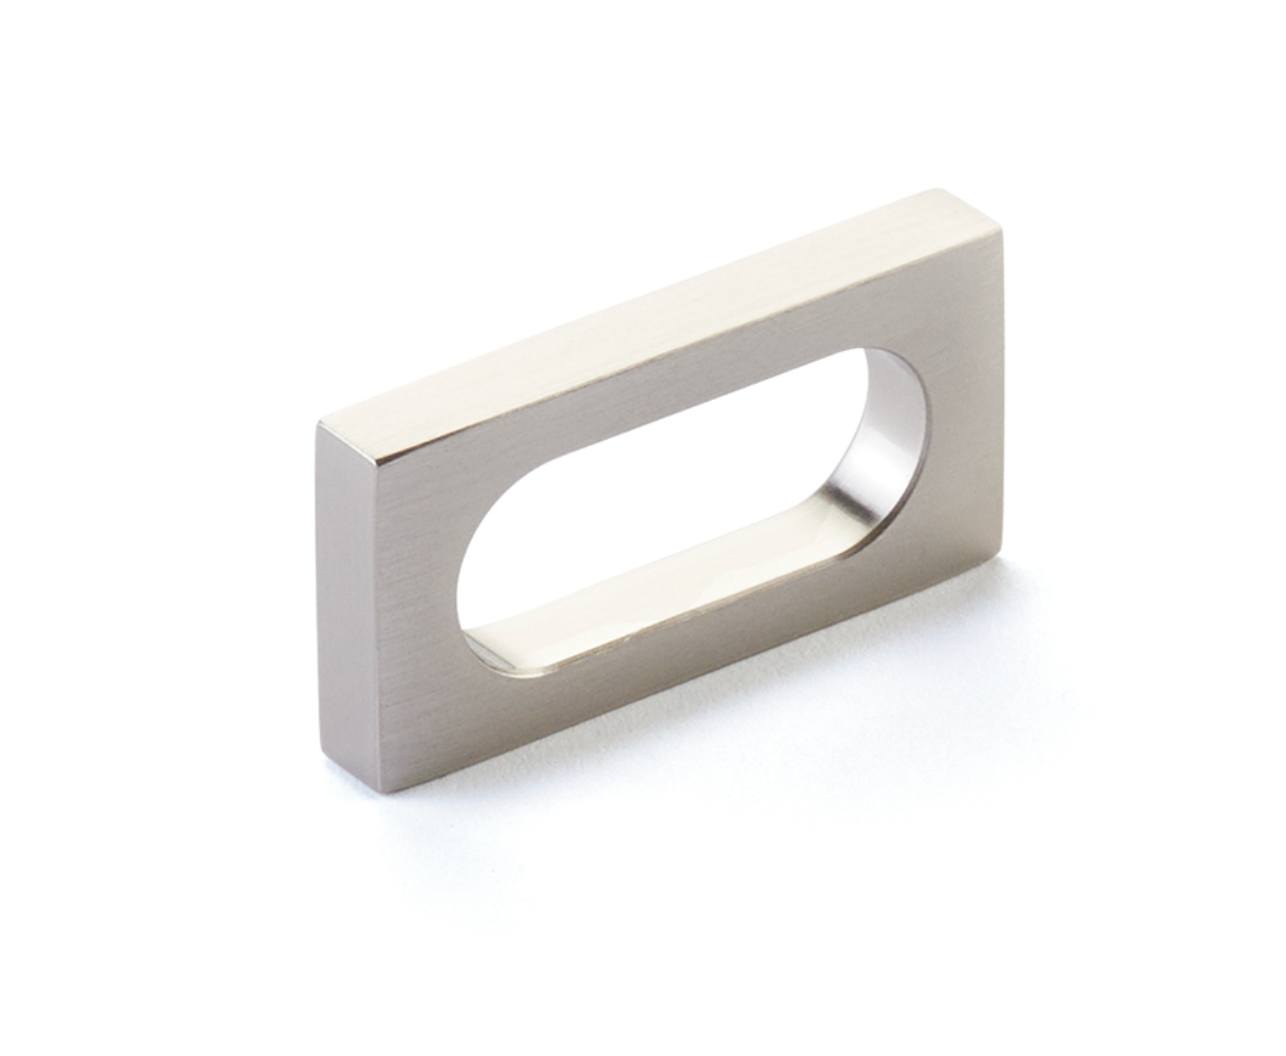 Brushed Nickel "Loop" Square Drawer Pulls and Cabinet Knobs